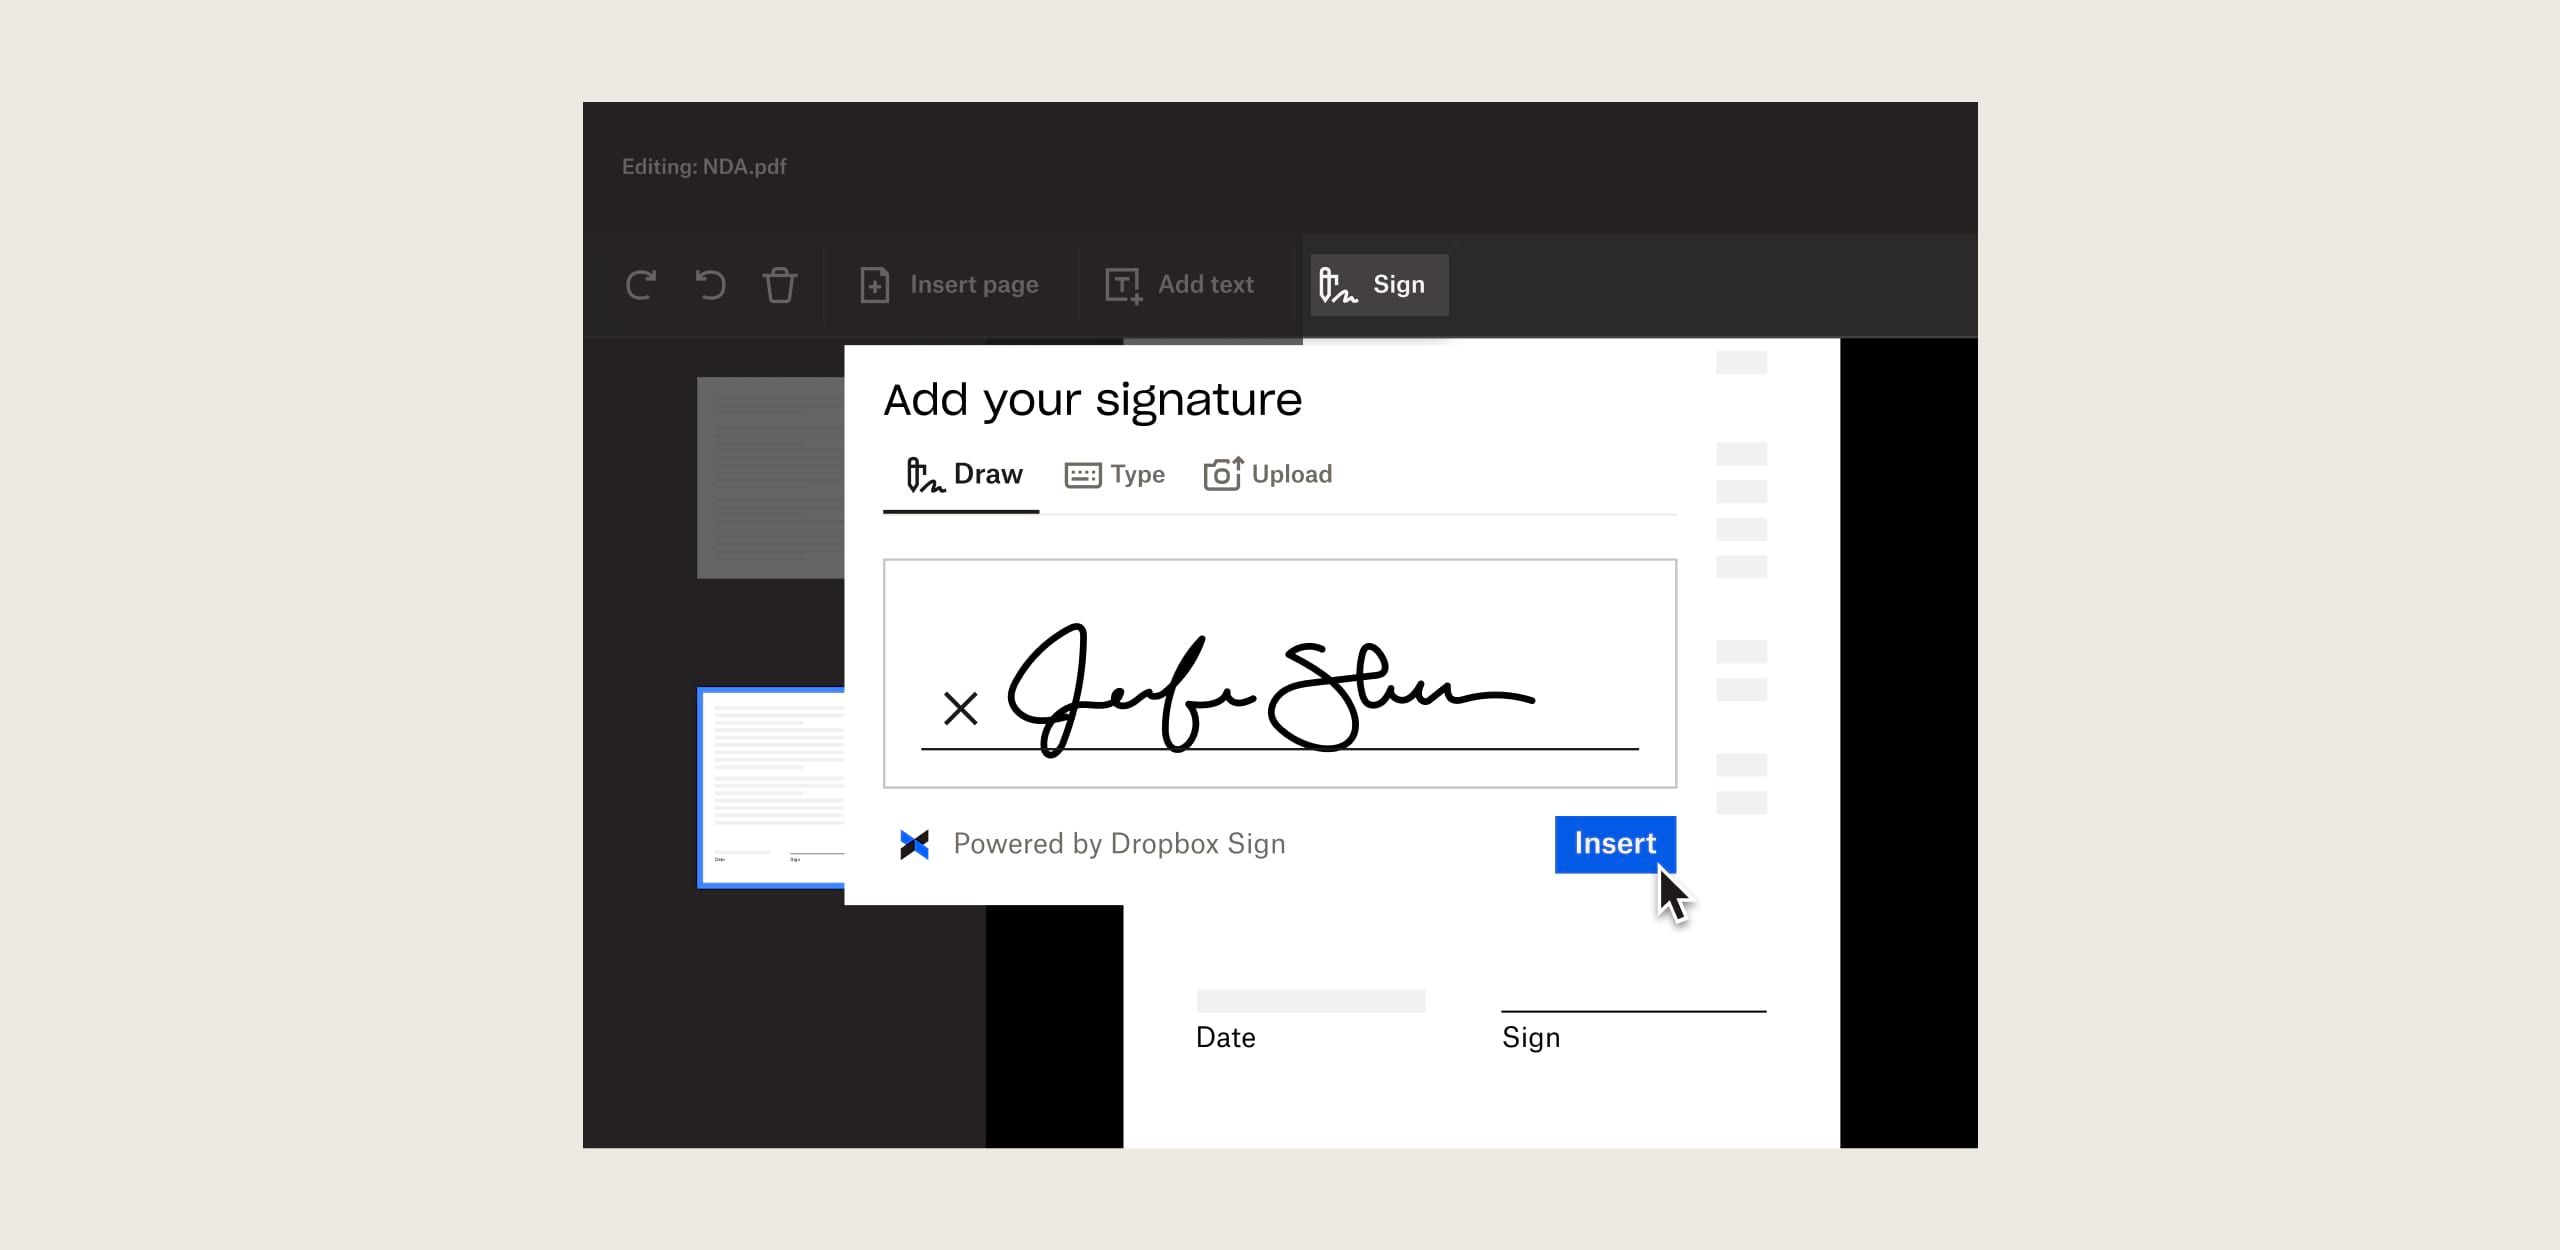 A person inserts their signature into a document with Dropbox Sign